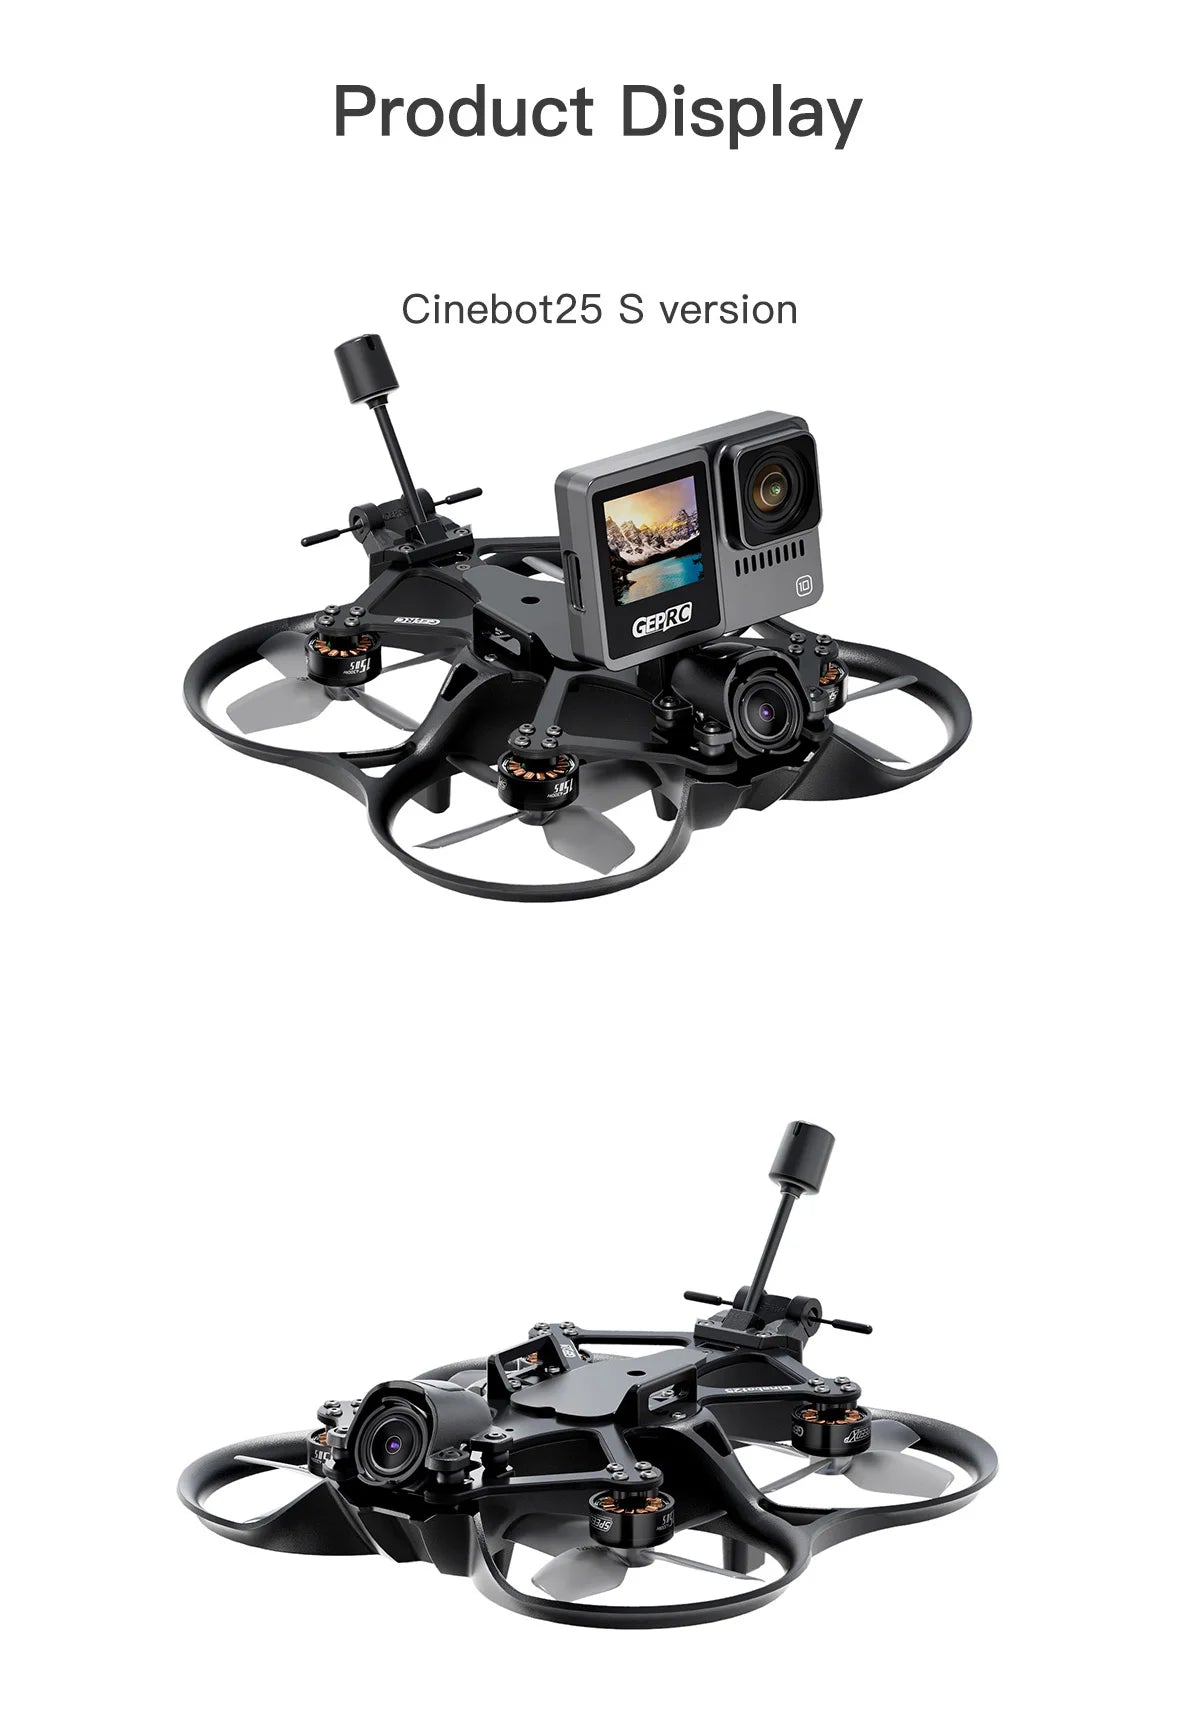 GEPRC Cinebot25 S HD O3  2.5inch FPV, GEPRO Cinebot25 S version S451 